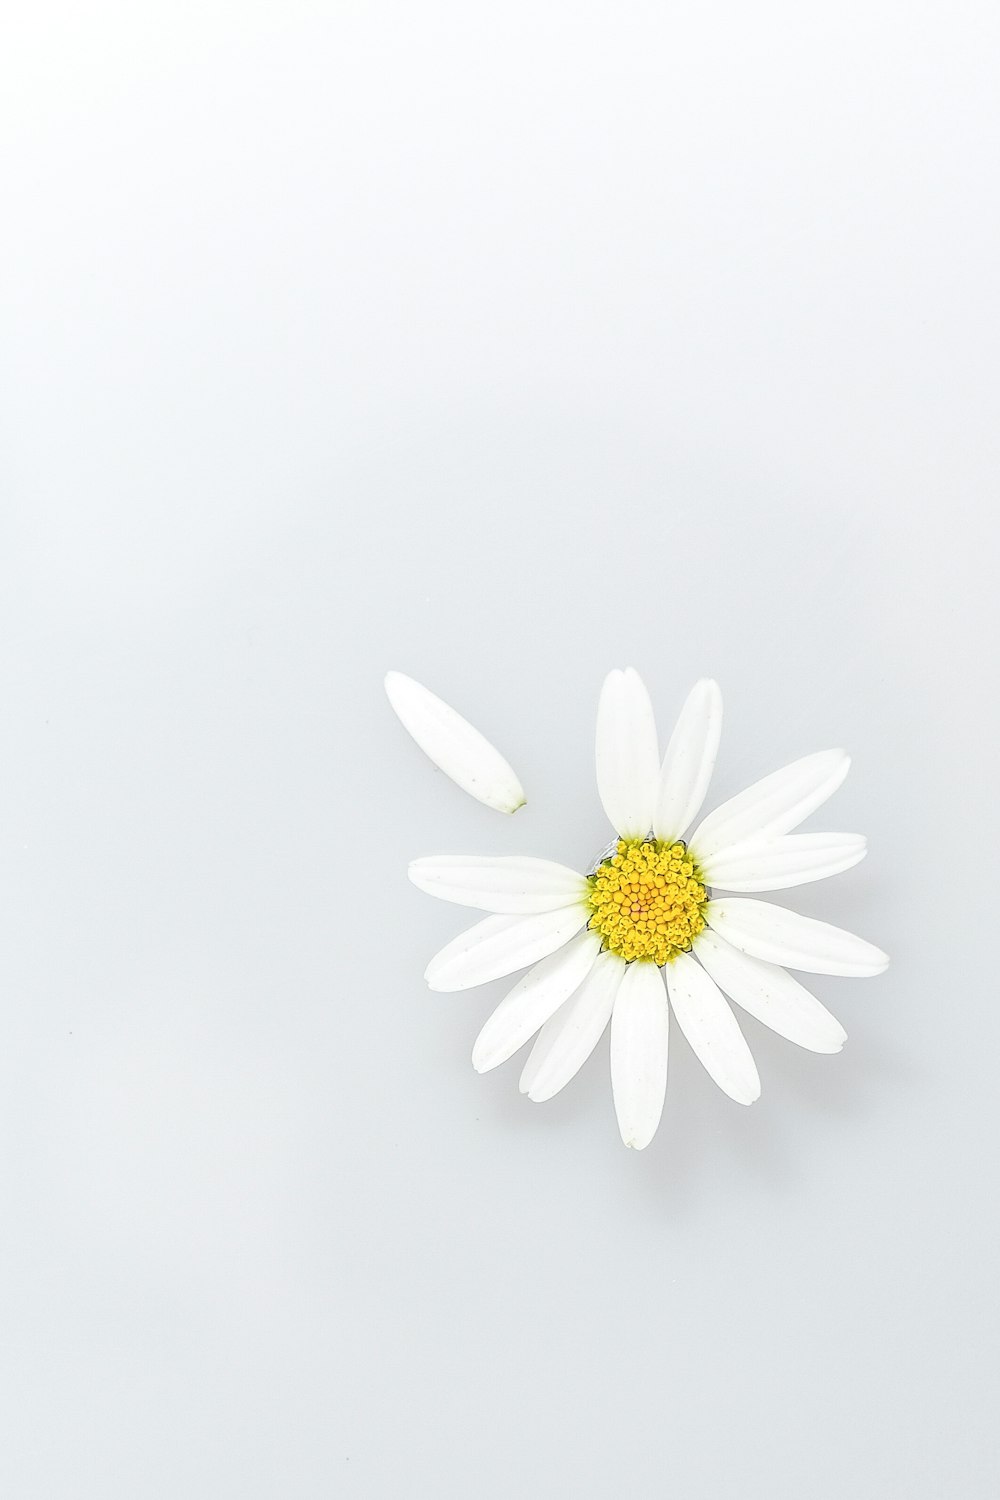 white daisy in bloom close up photo